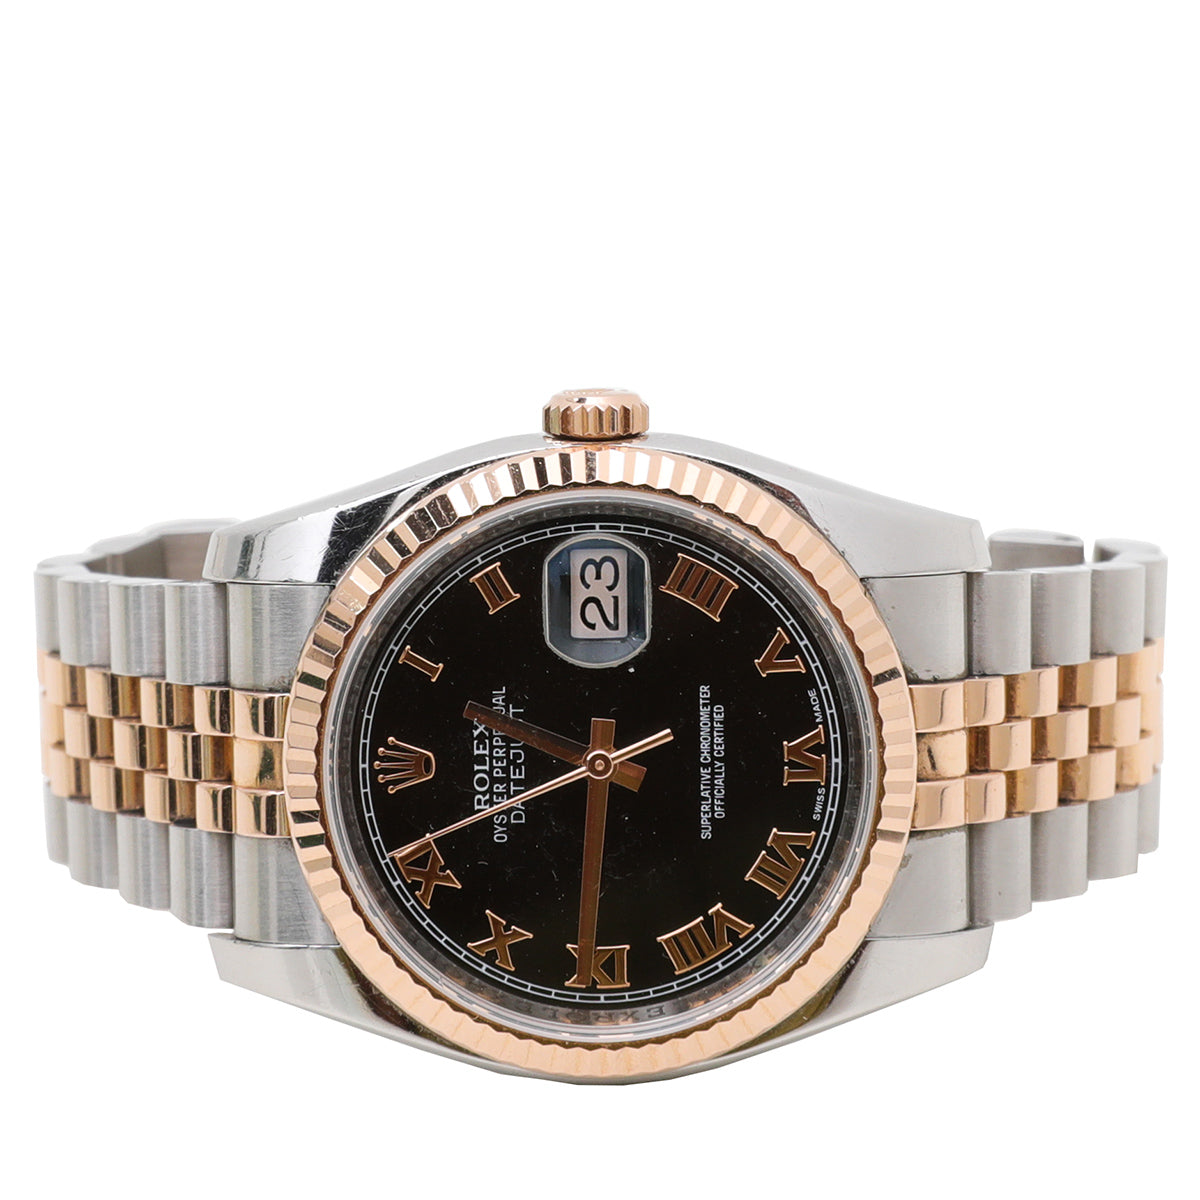 Rolex Datejust 18K Rose Gold Oyster Perpetual 36mm Watch